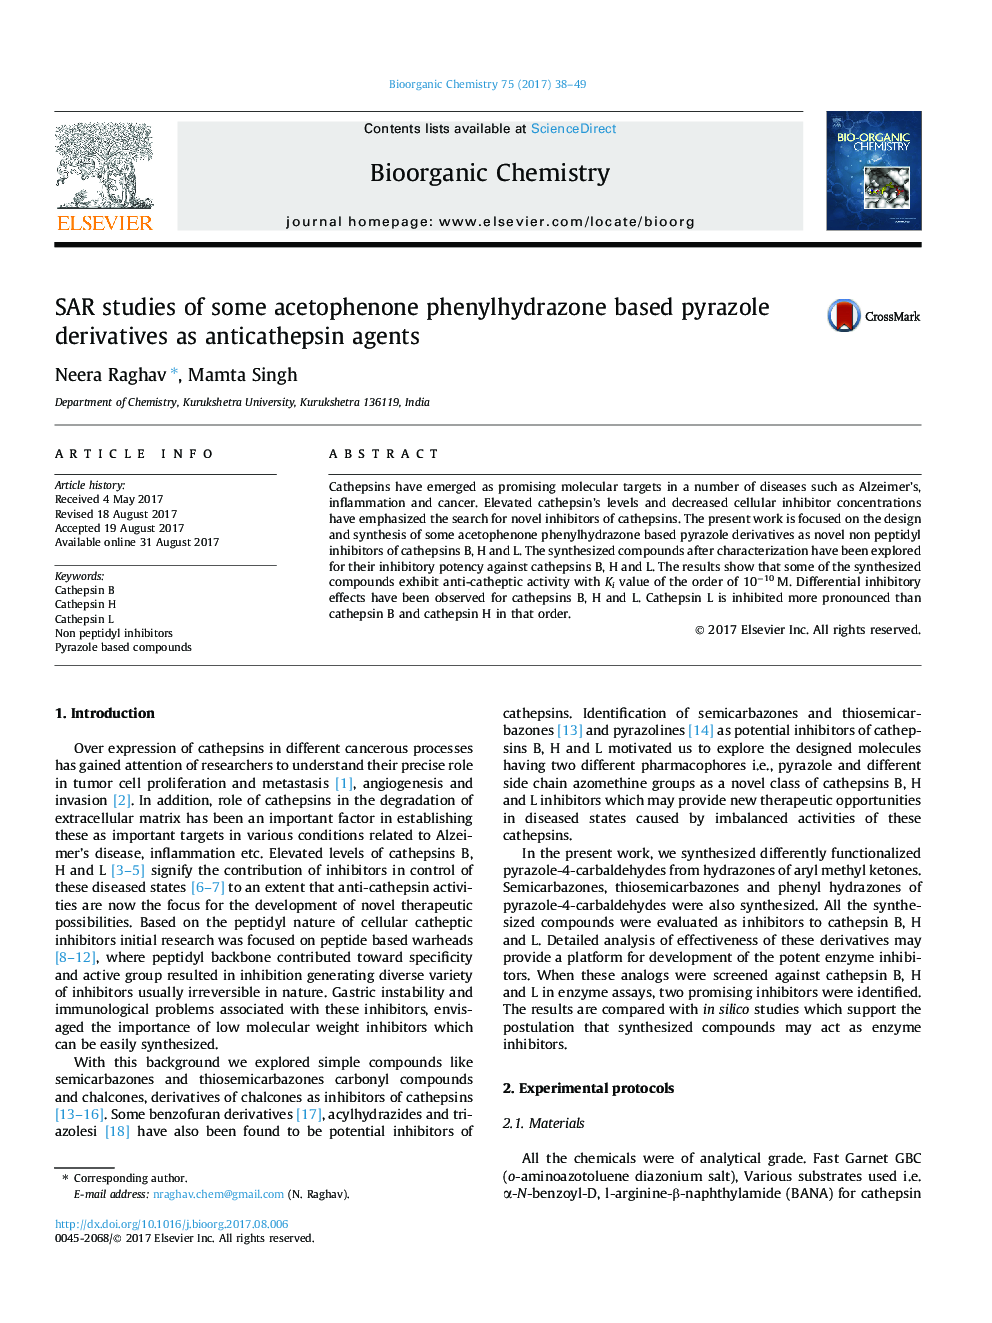 SAR studies of some acetophenone phenylhydrazone based pyrazole derivatives as anticathepsin agents